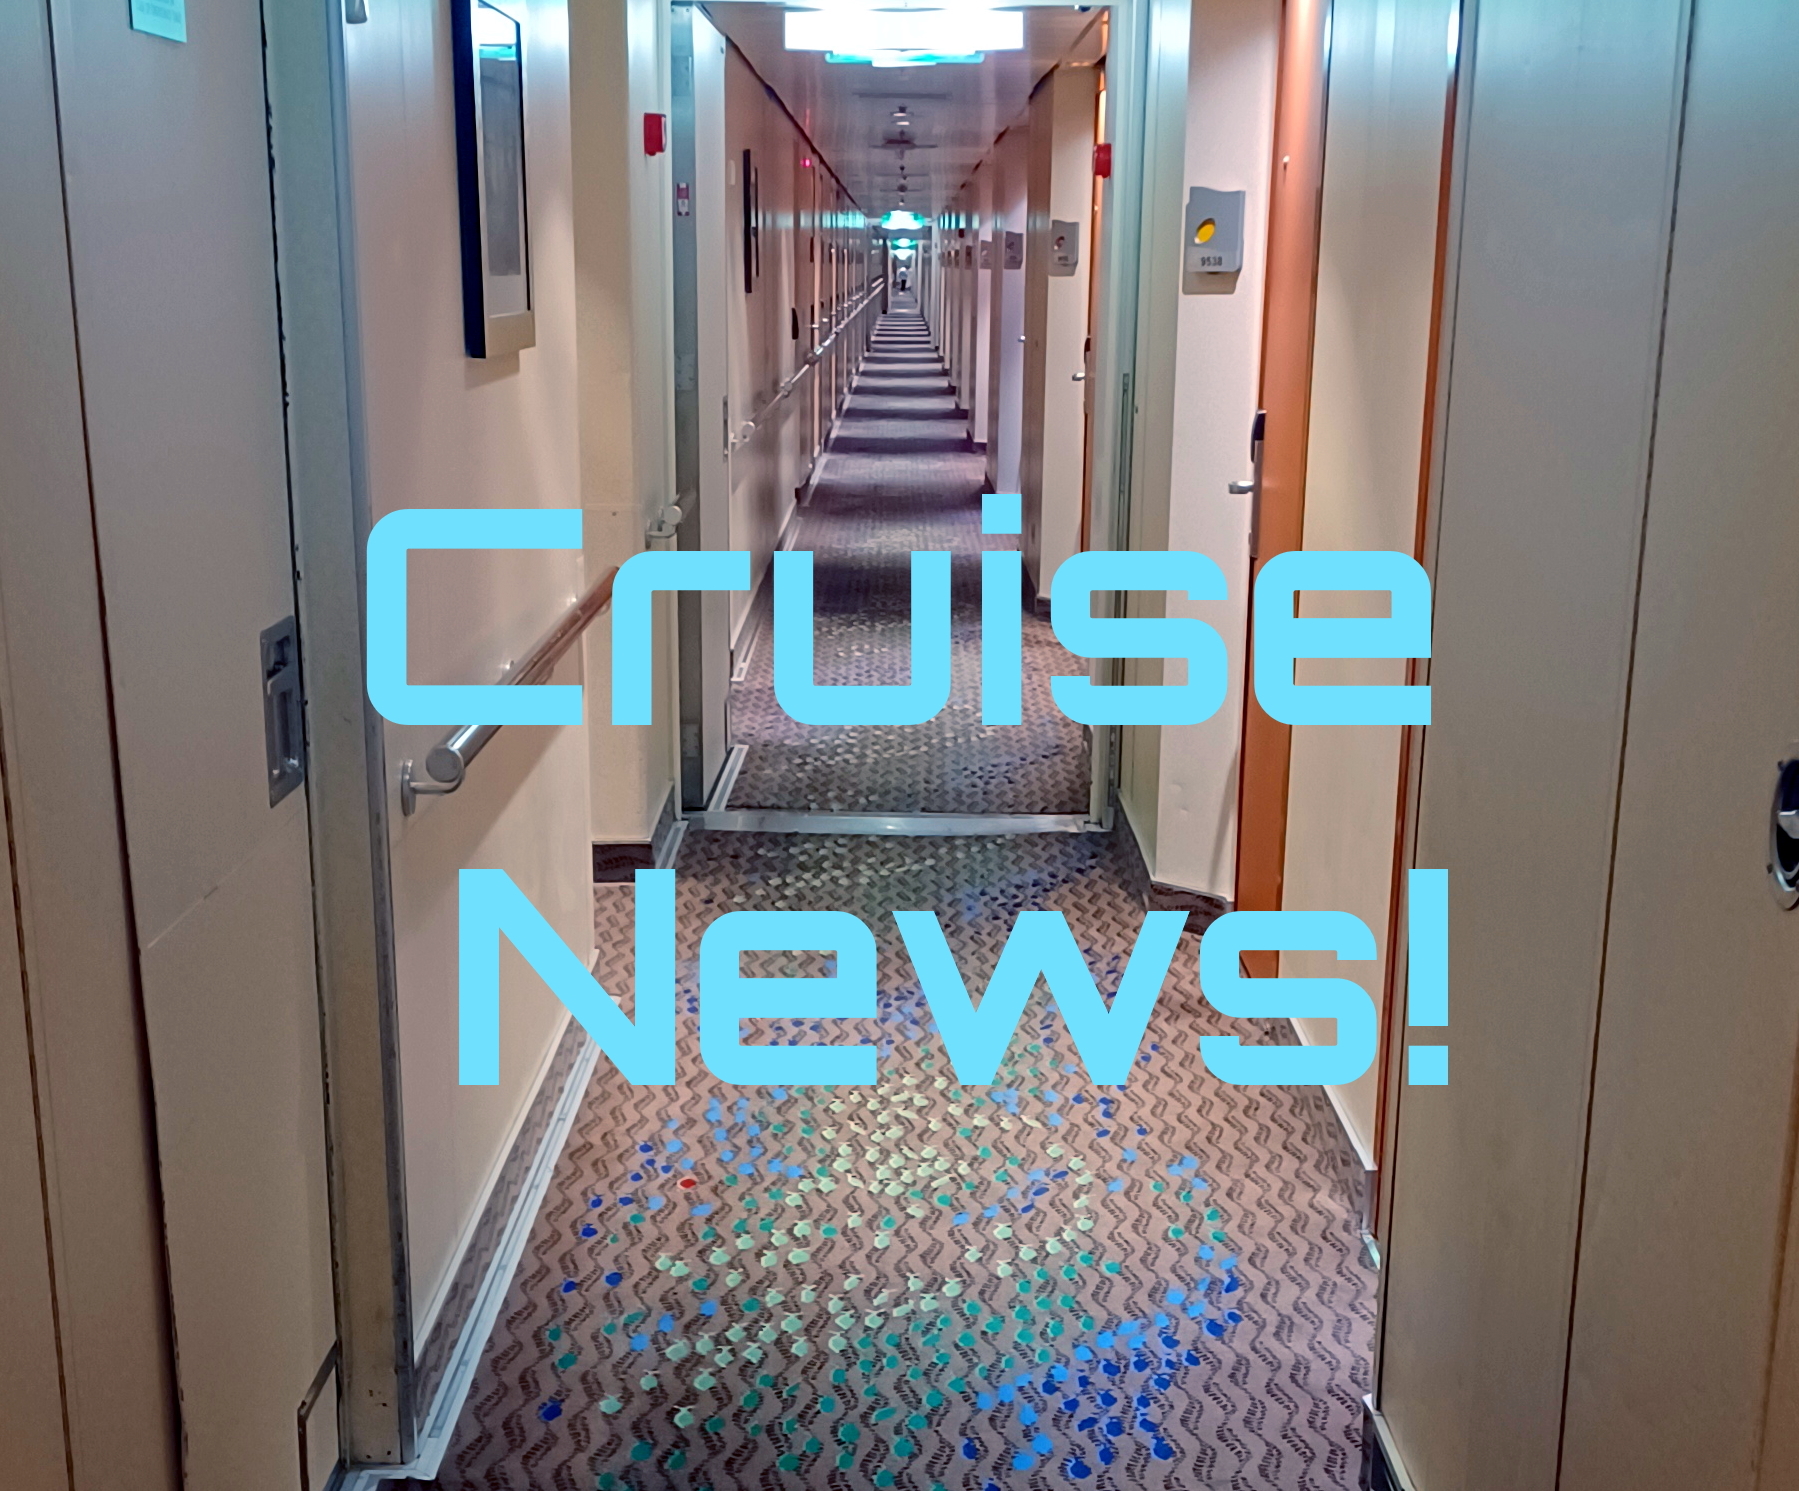 news for tampa swingers cruise Porn Photos